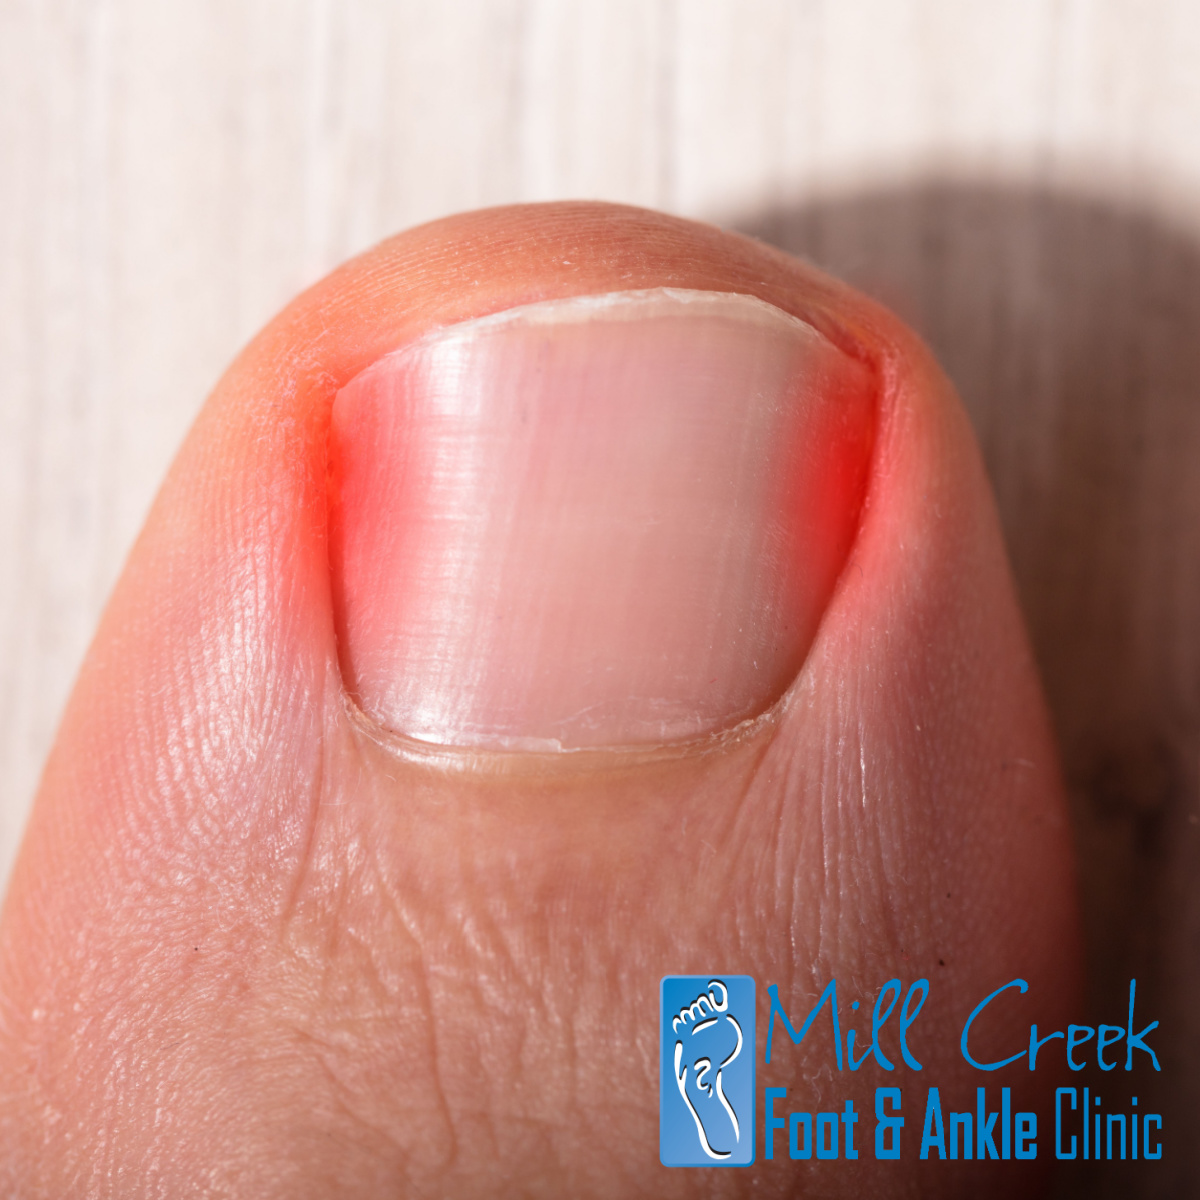 Visit A Podiatrist In The Mukilteo Area For Ingrown Toenail Treatment Or Surgery